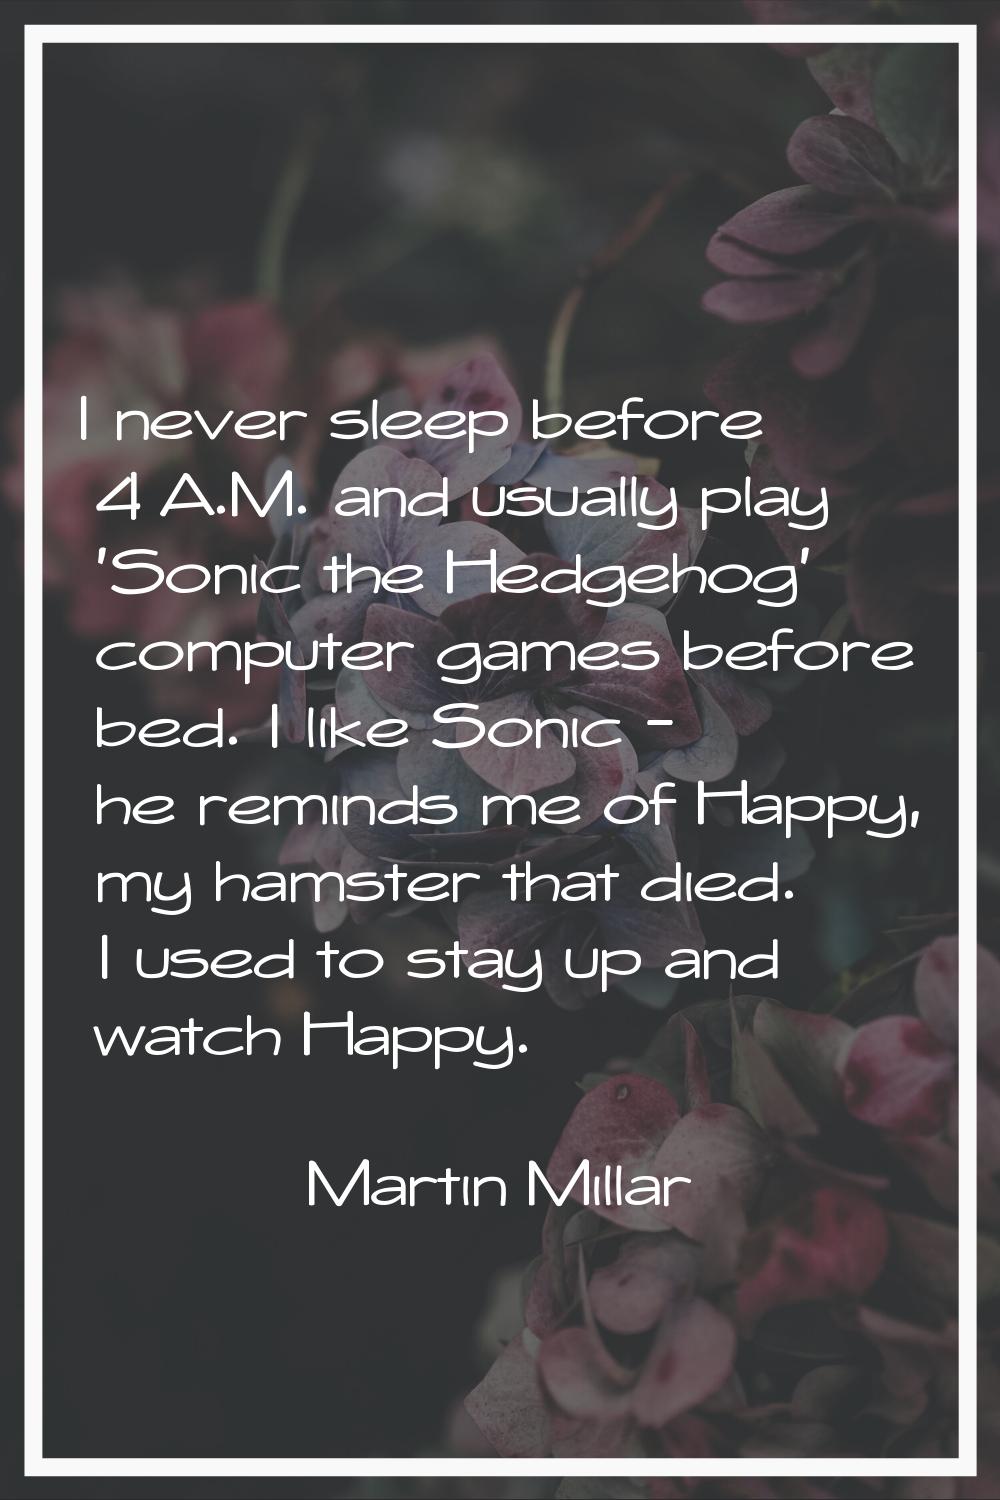 I never sleep before 4 A.M. and usually play 'Sonic the Hedgehog' computer games before bed. I like